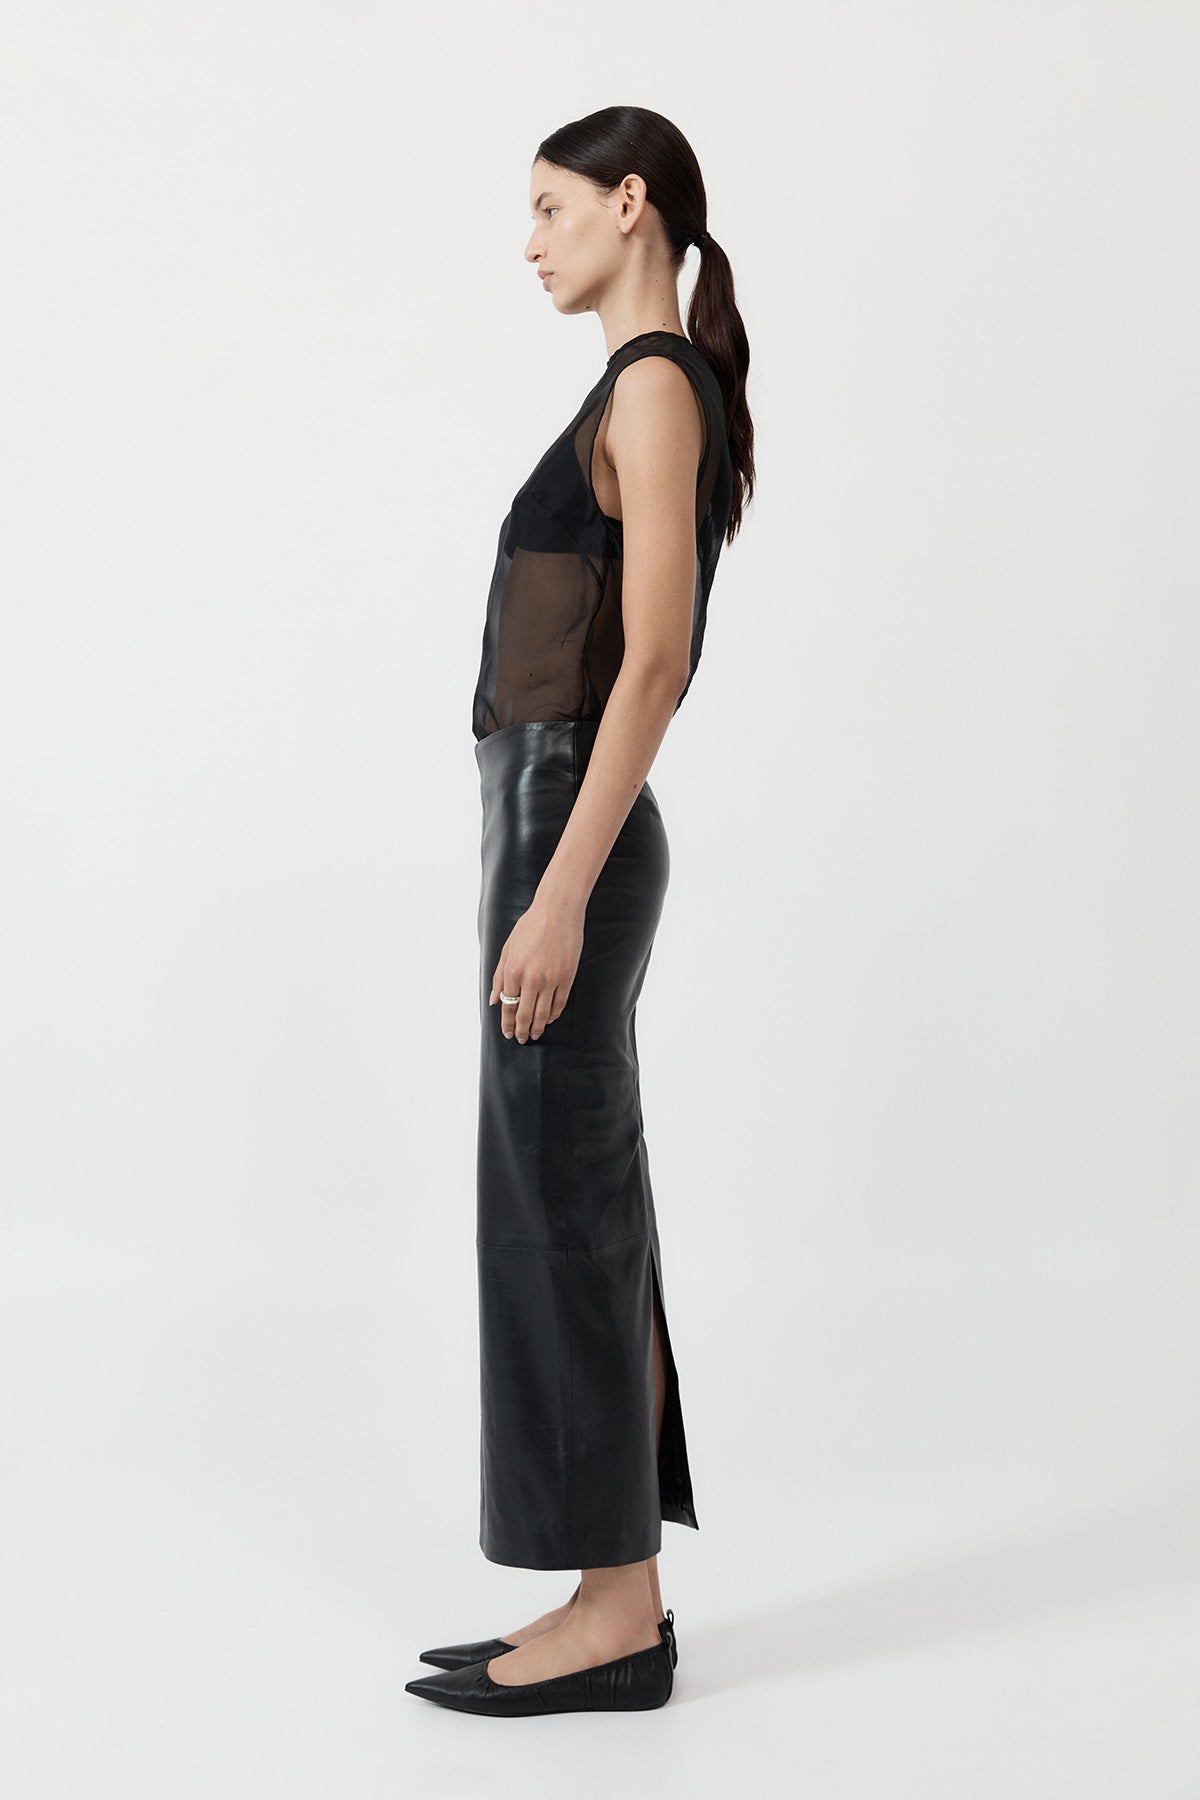 The St Agni Leather Column Skirt in Black available at The New Trend Australia